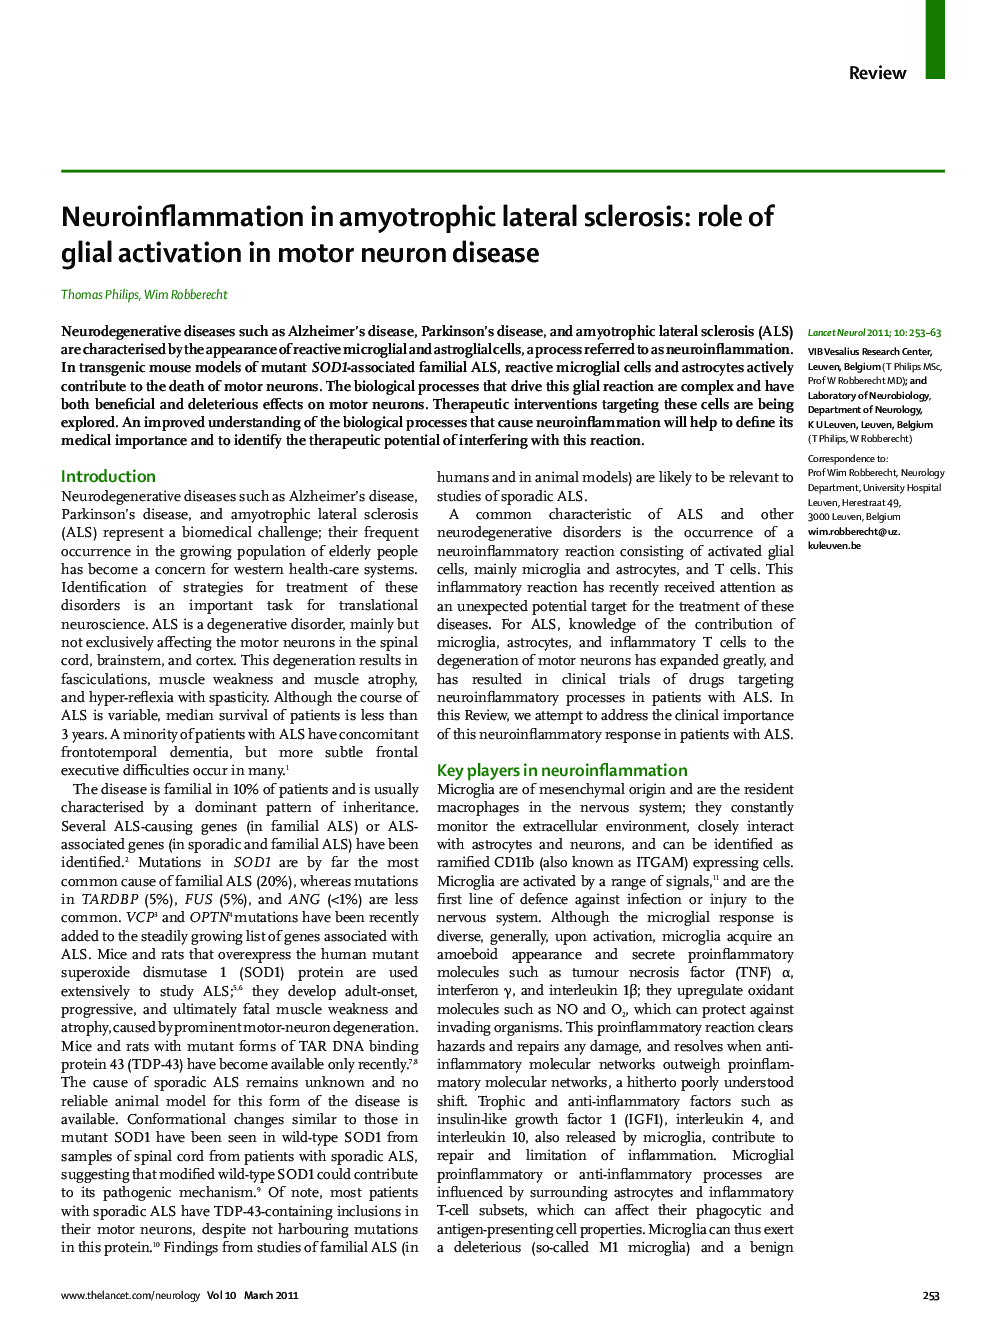 Neuroinflammation in amyotrophic lateral sclerosis: role of glial activation in motor neuron disease